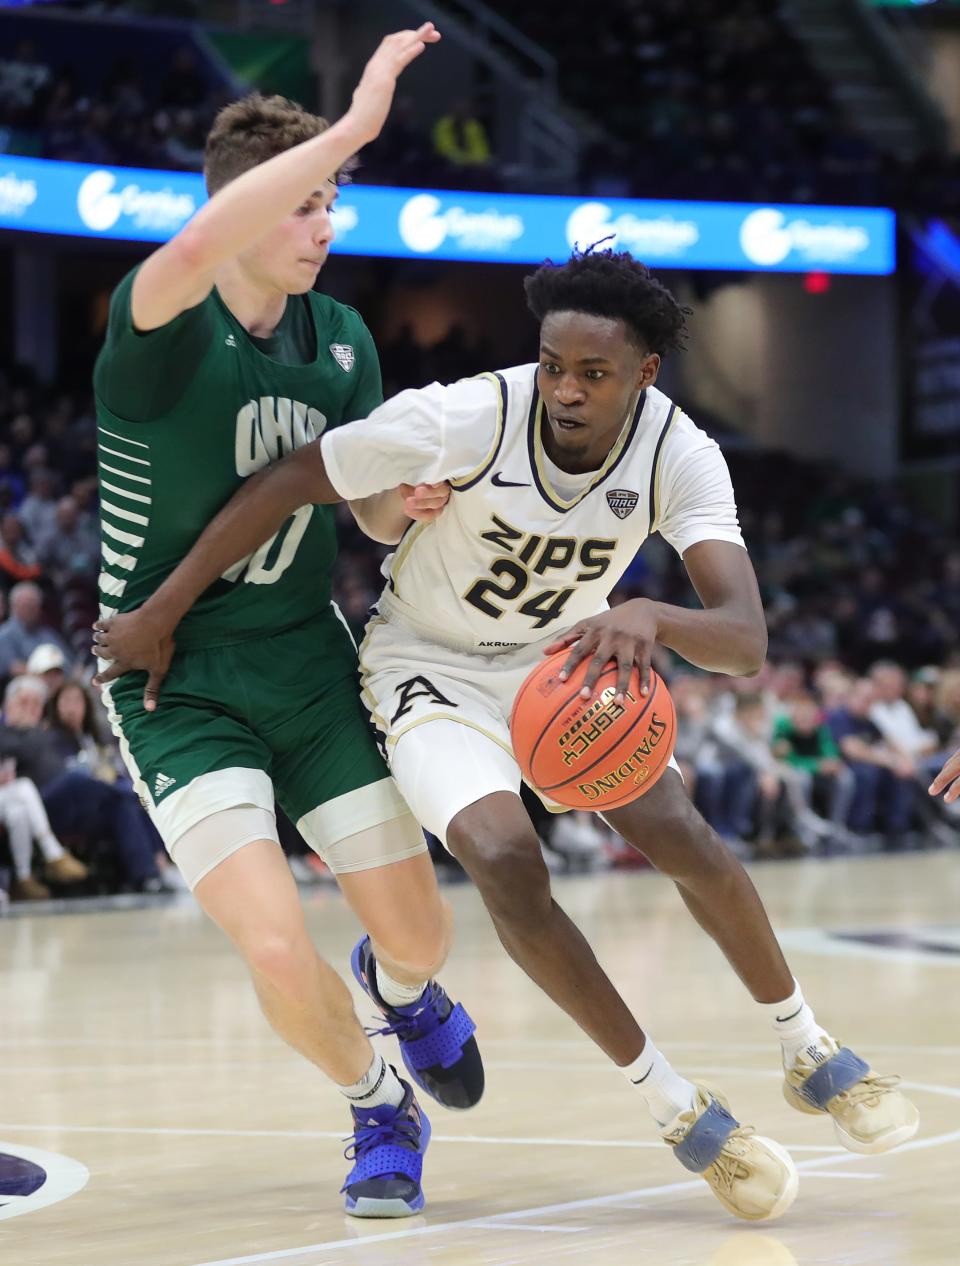 Akron Zips guard Ali Ali (24) drives against Ohio Bobcats forward Aidan Hadaway (10) during the second half of an NCAA college basketball game in the semifinals of the Mid-American Conference Tournament at Rocket Mortgage FieldHouse, Friday, March 15, 2024, in Cleveland, Ohio.